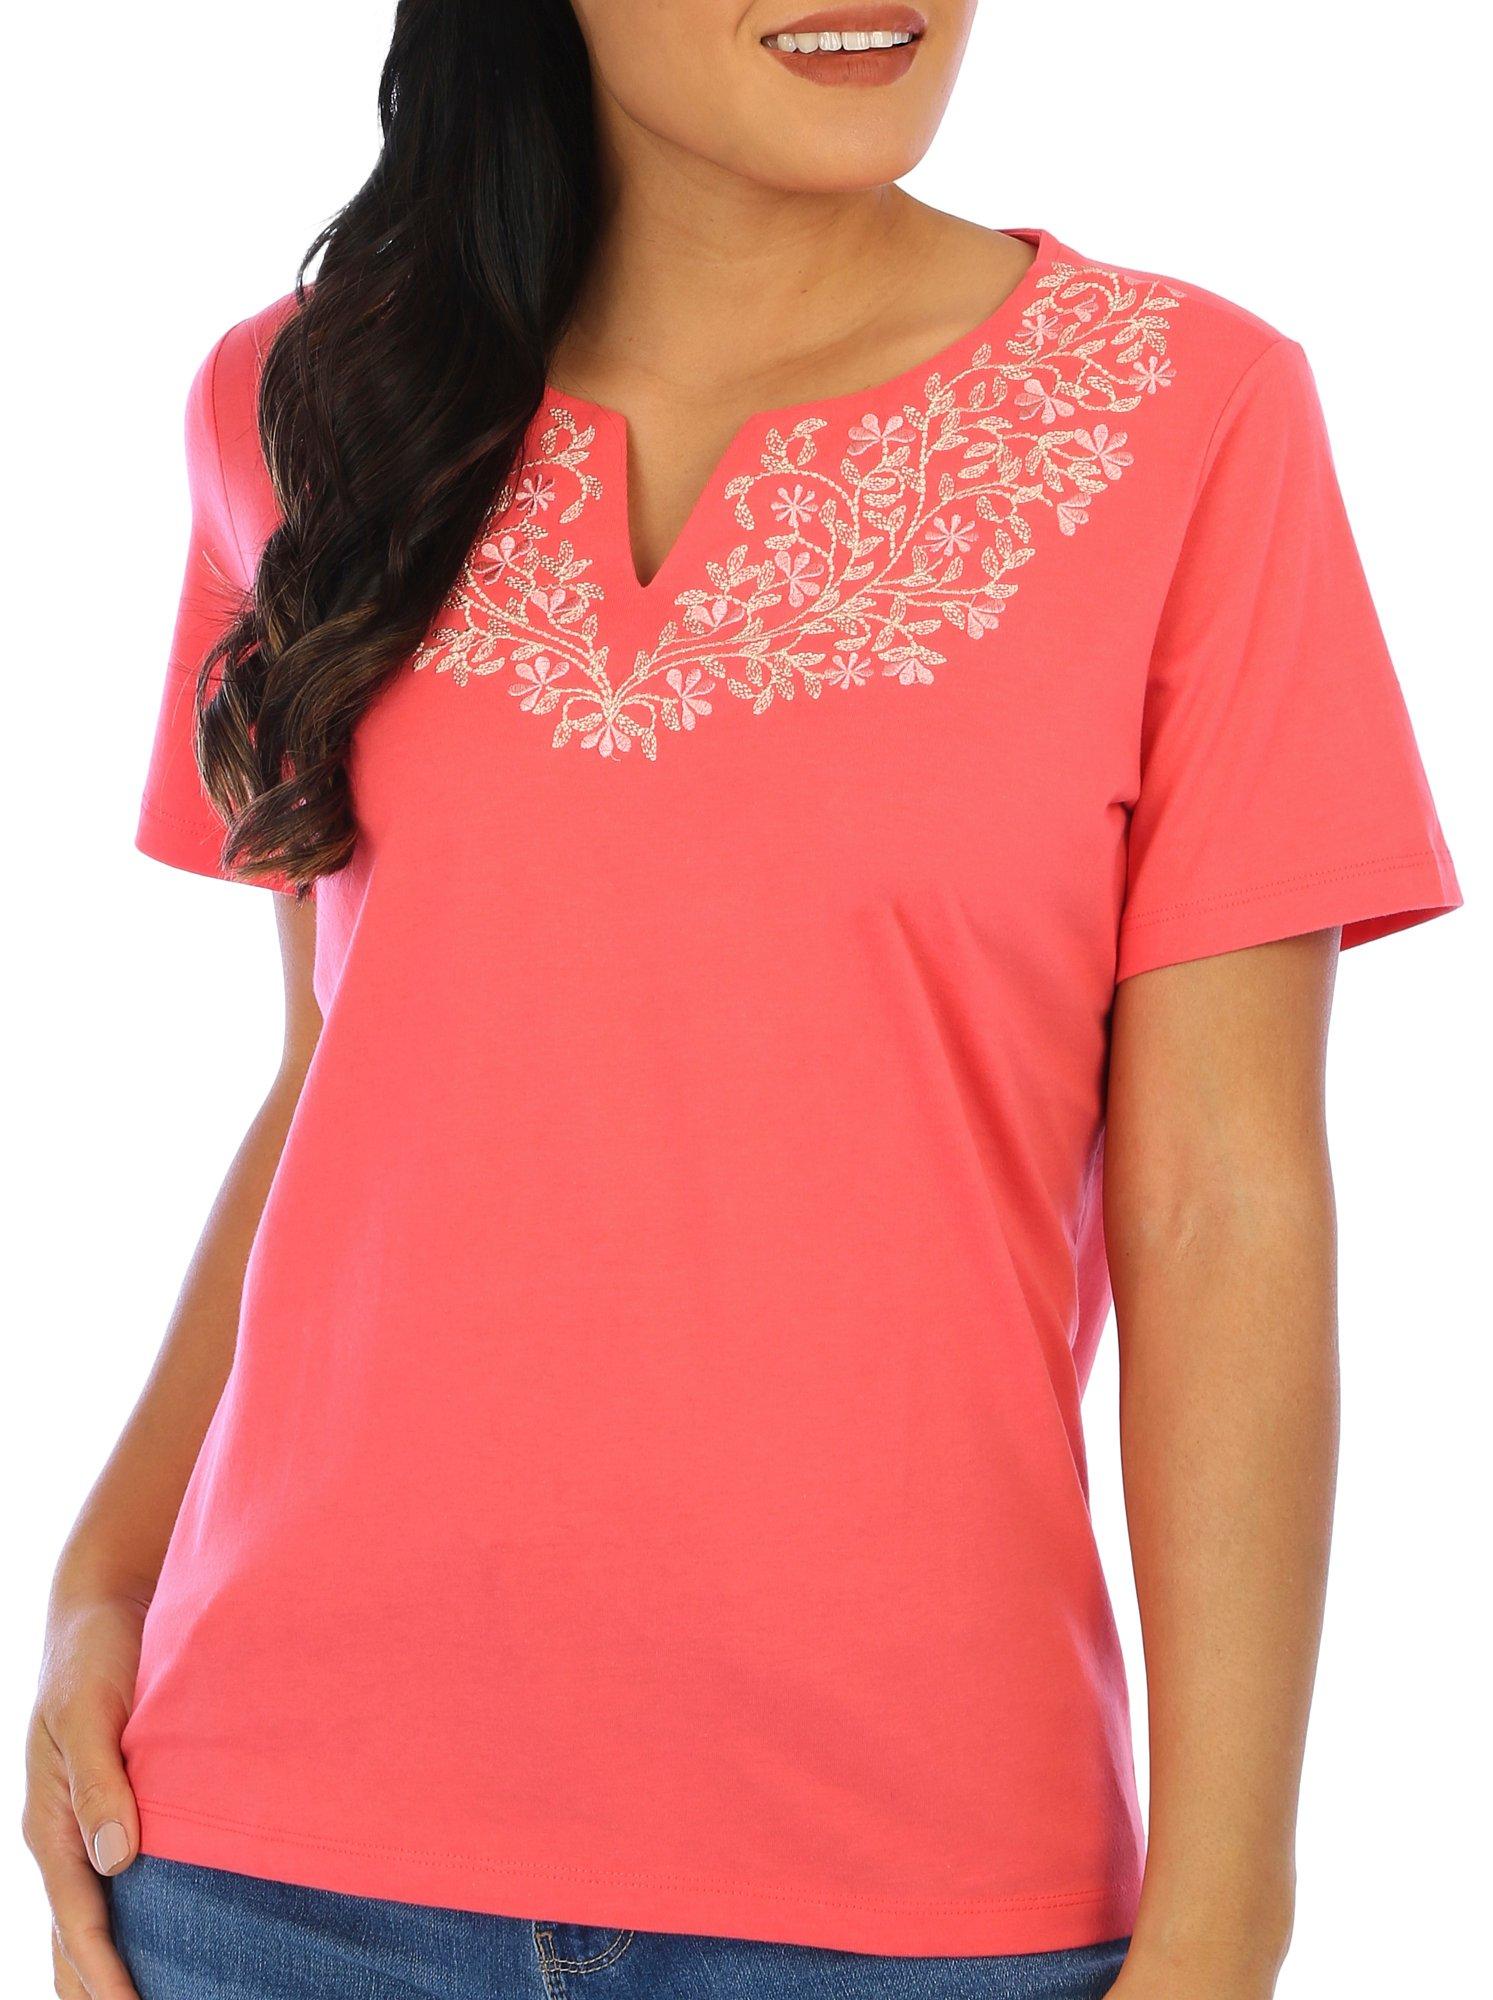 Petite Solid Floral Embroidered Short Sleeve Top